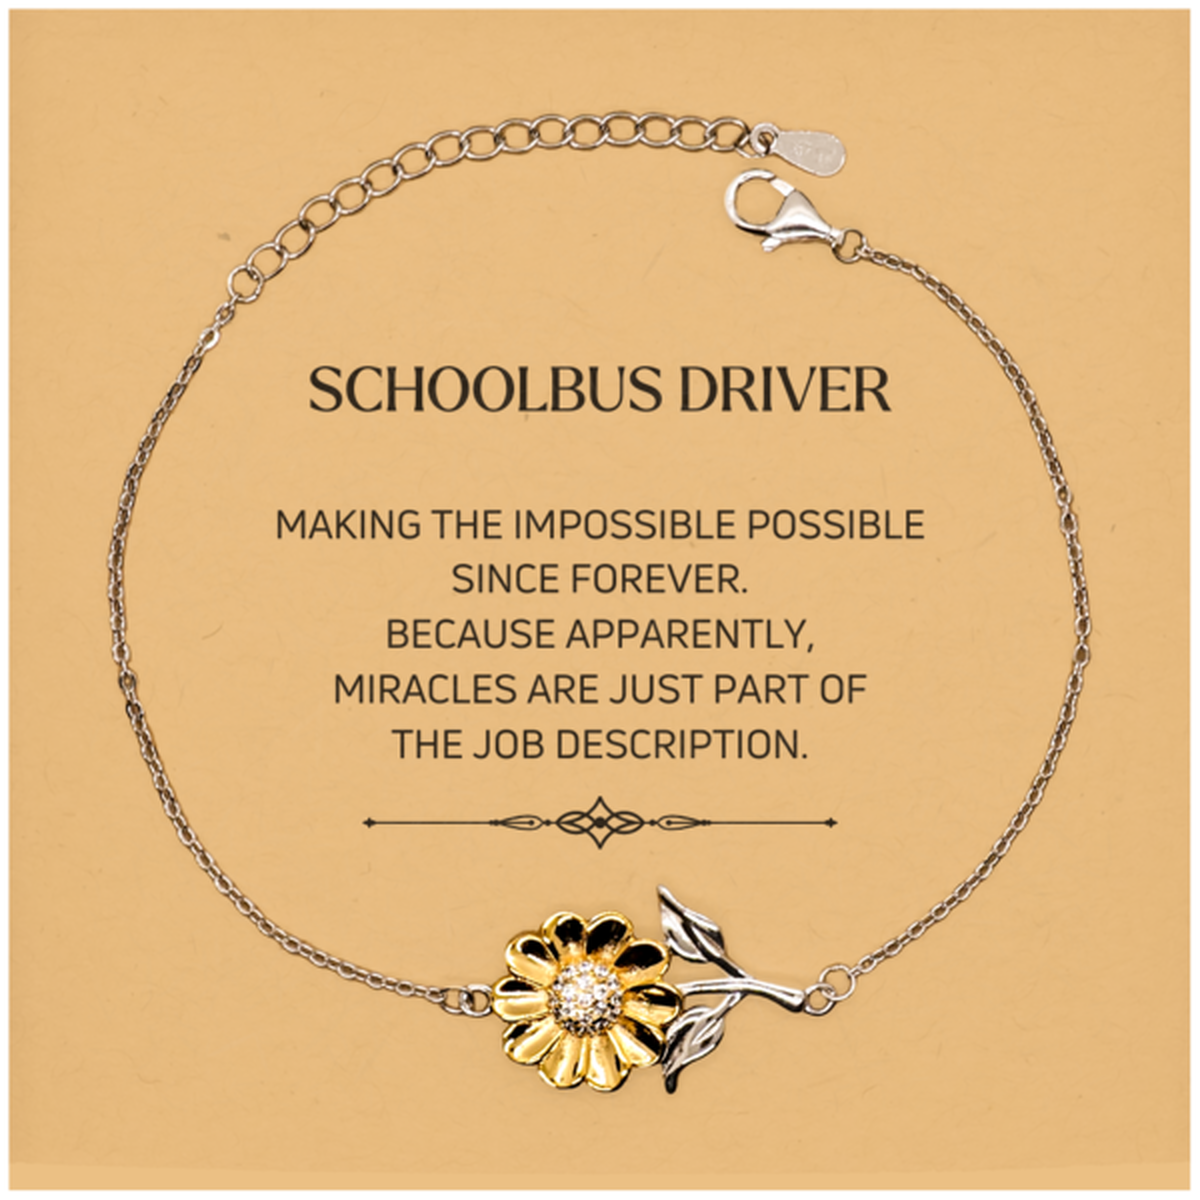 Funny Schoolbus Driver Gifts, Miracles are just part of the job description, Inspirational Birthday Christmas Sunflower Bracelet For Schoolbus Driver, Men, Women, Coworkers, Friends, Boss